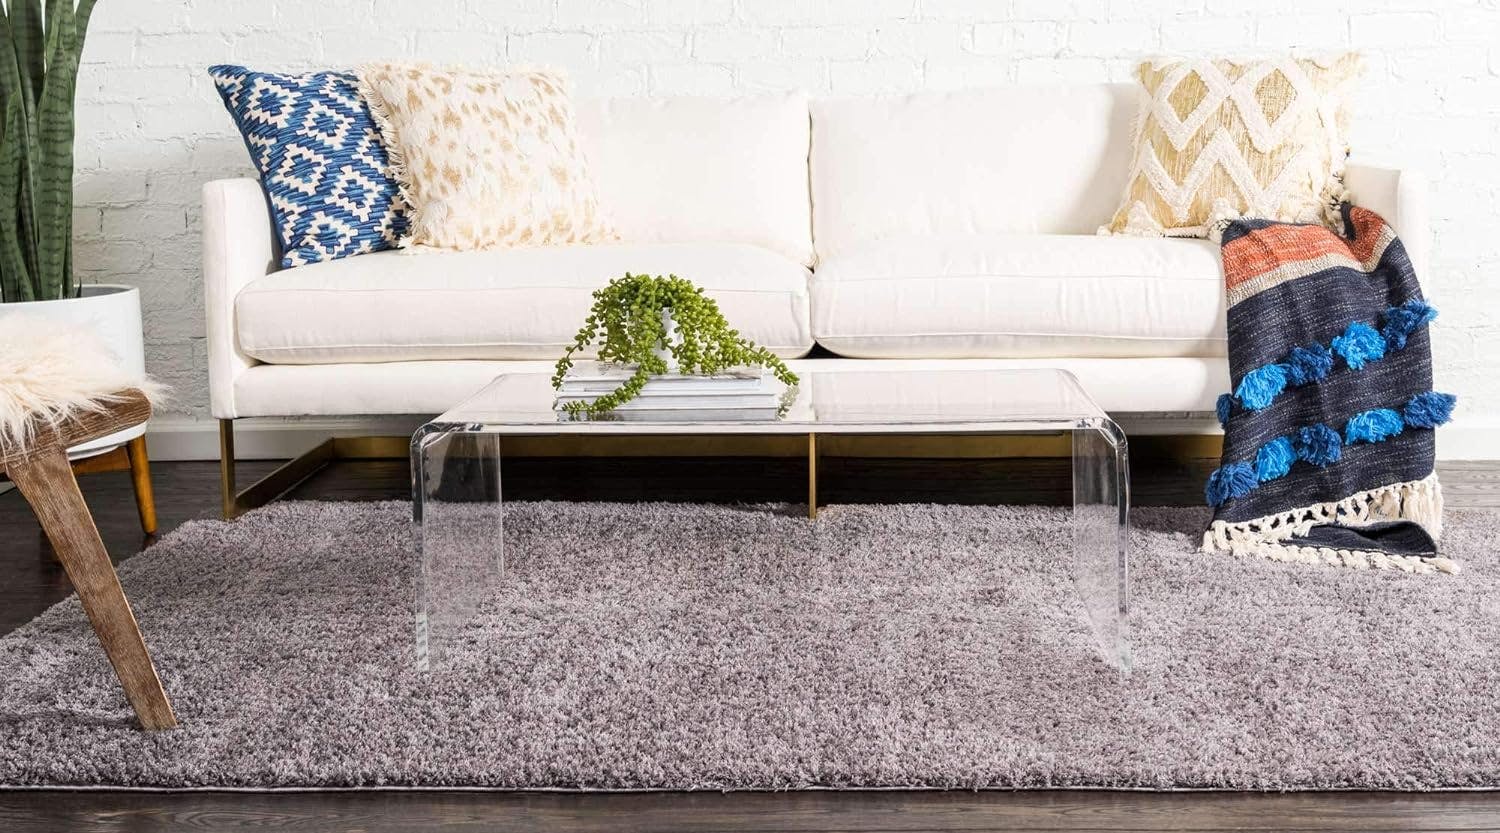 Lavish Gray Rectangular Shag Rug 5' x 8' - Stain-Resistant and Easy Care